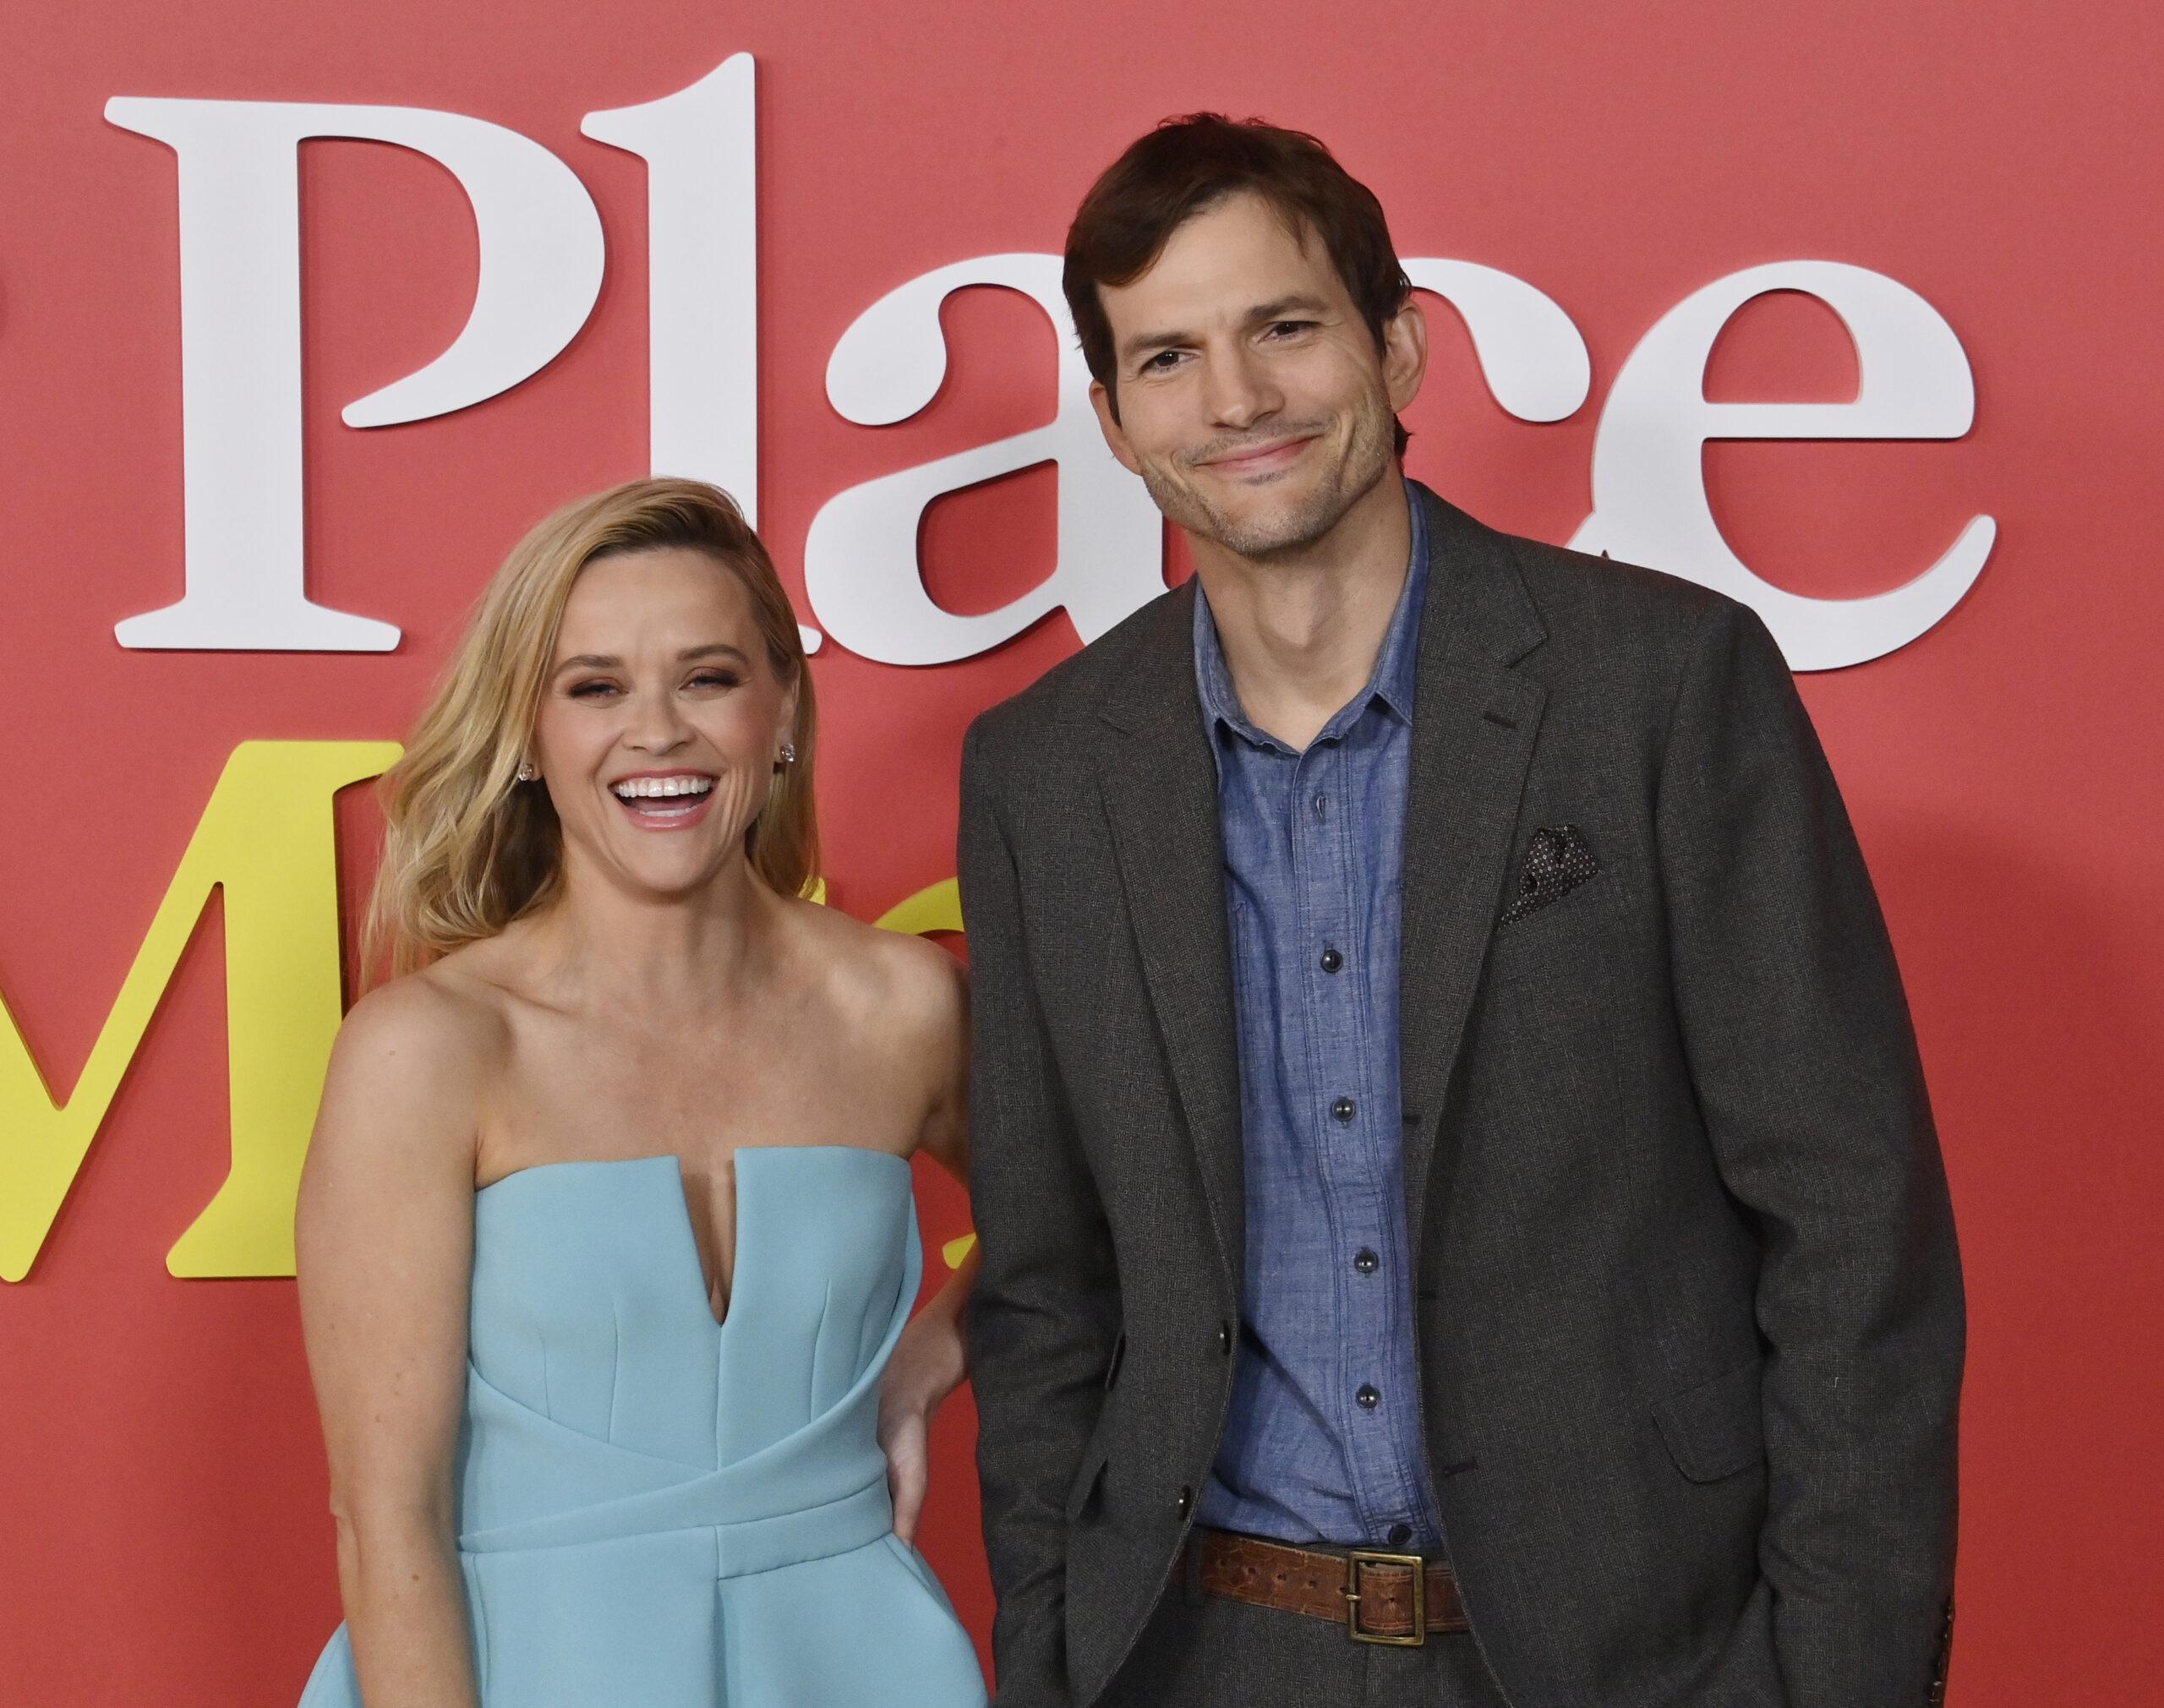 Ashton Kutcher Says He And Reese Witherspoon Were Awkward At Film Premiere To Avoid Affair Rumors